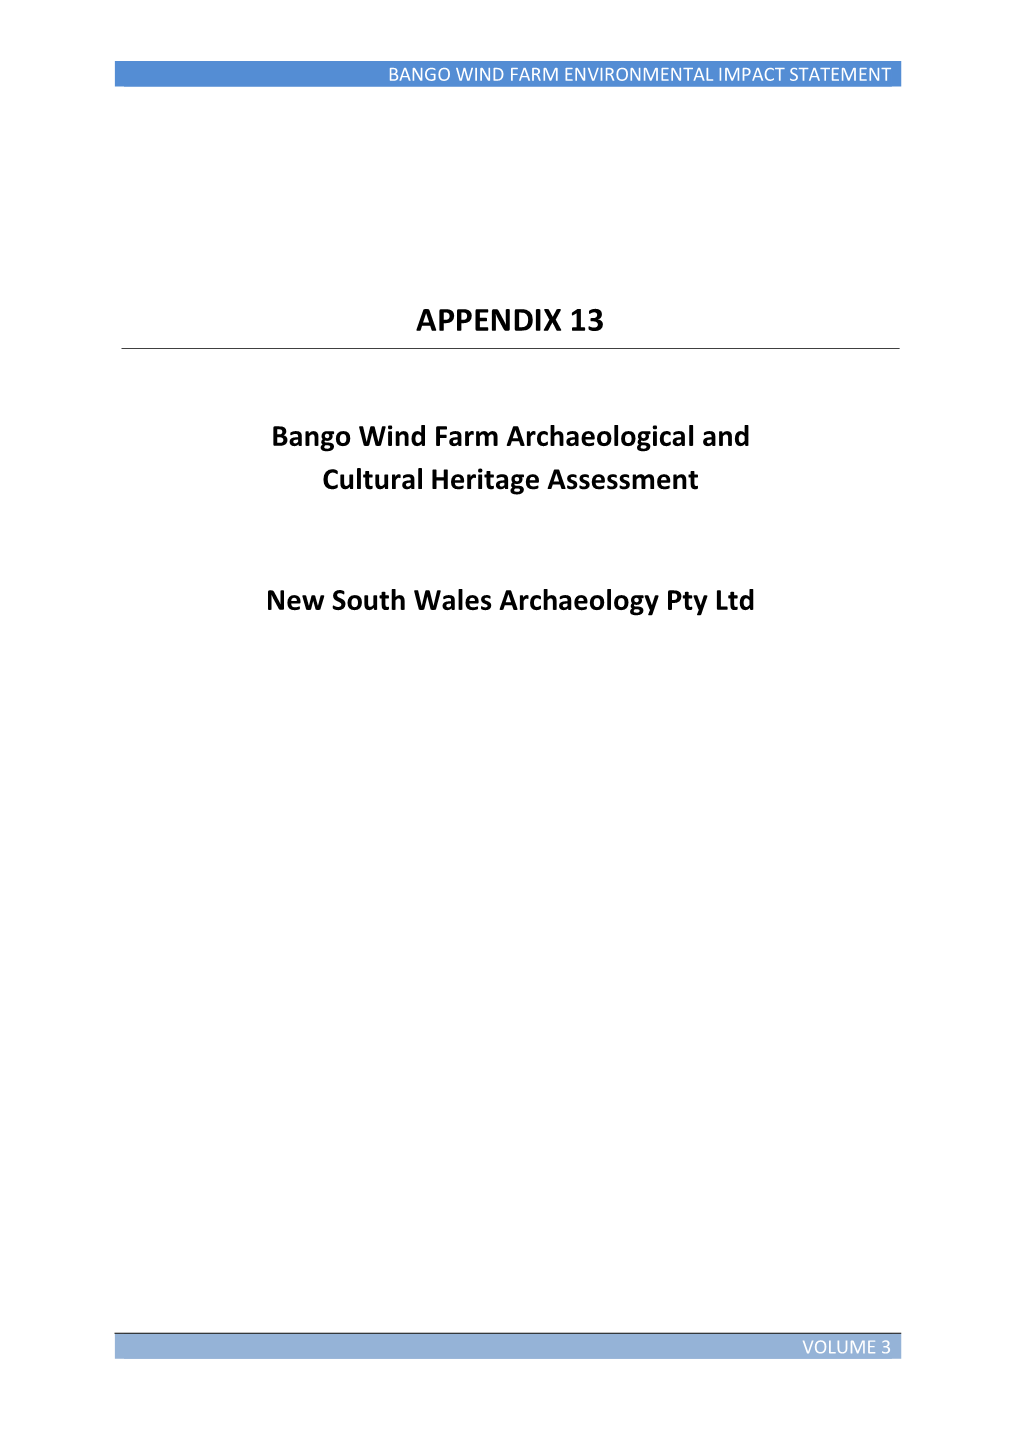 Bango Wind Farm Archaeological and Cultural Heritage Assessment New